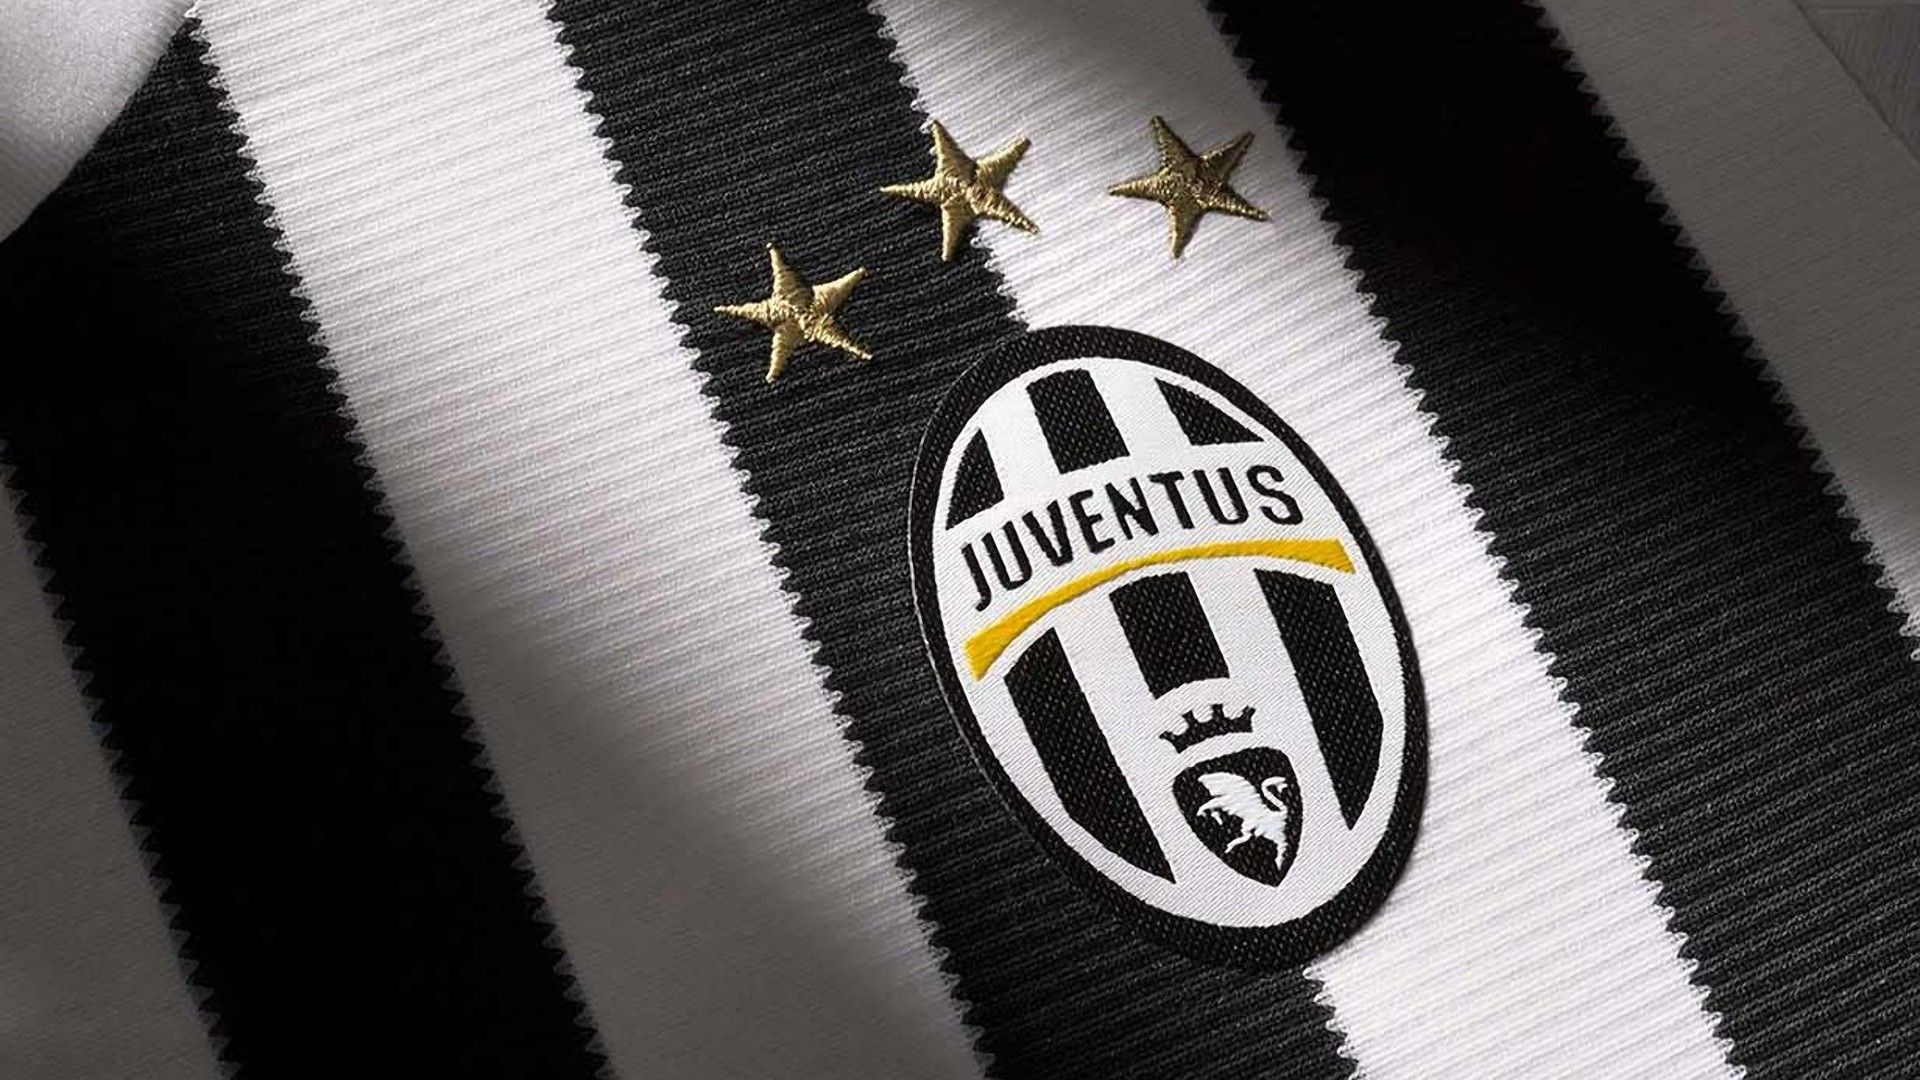 Juventus: The fourth in the all-time Union of European Football Associations (UEFA) competitions ranking, Adidas. 1920x1080 Full HD Background.